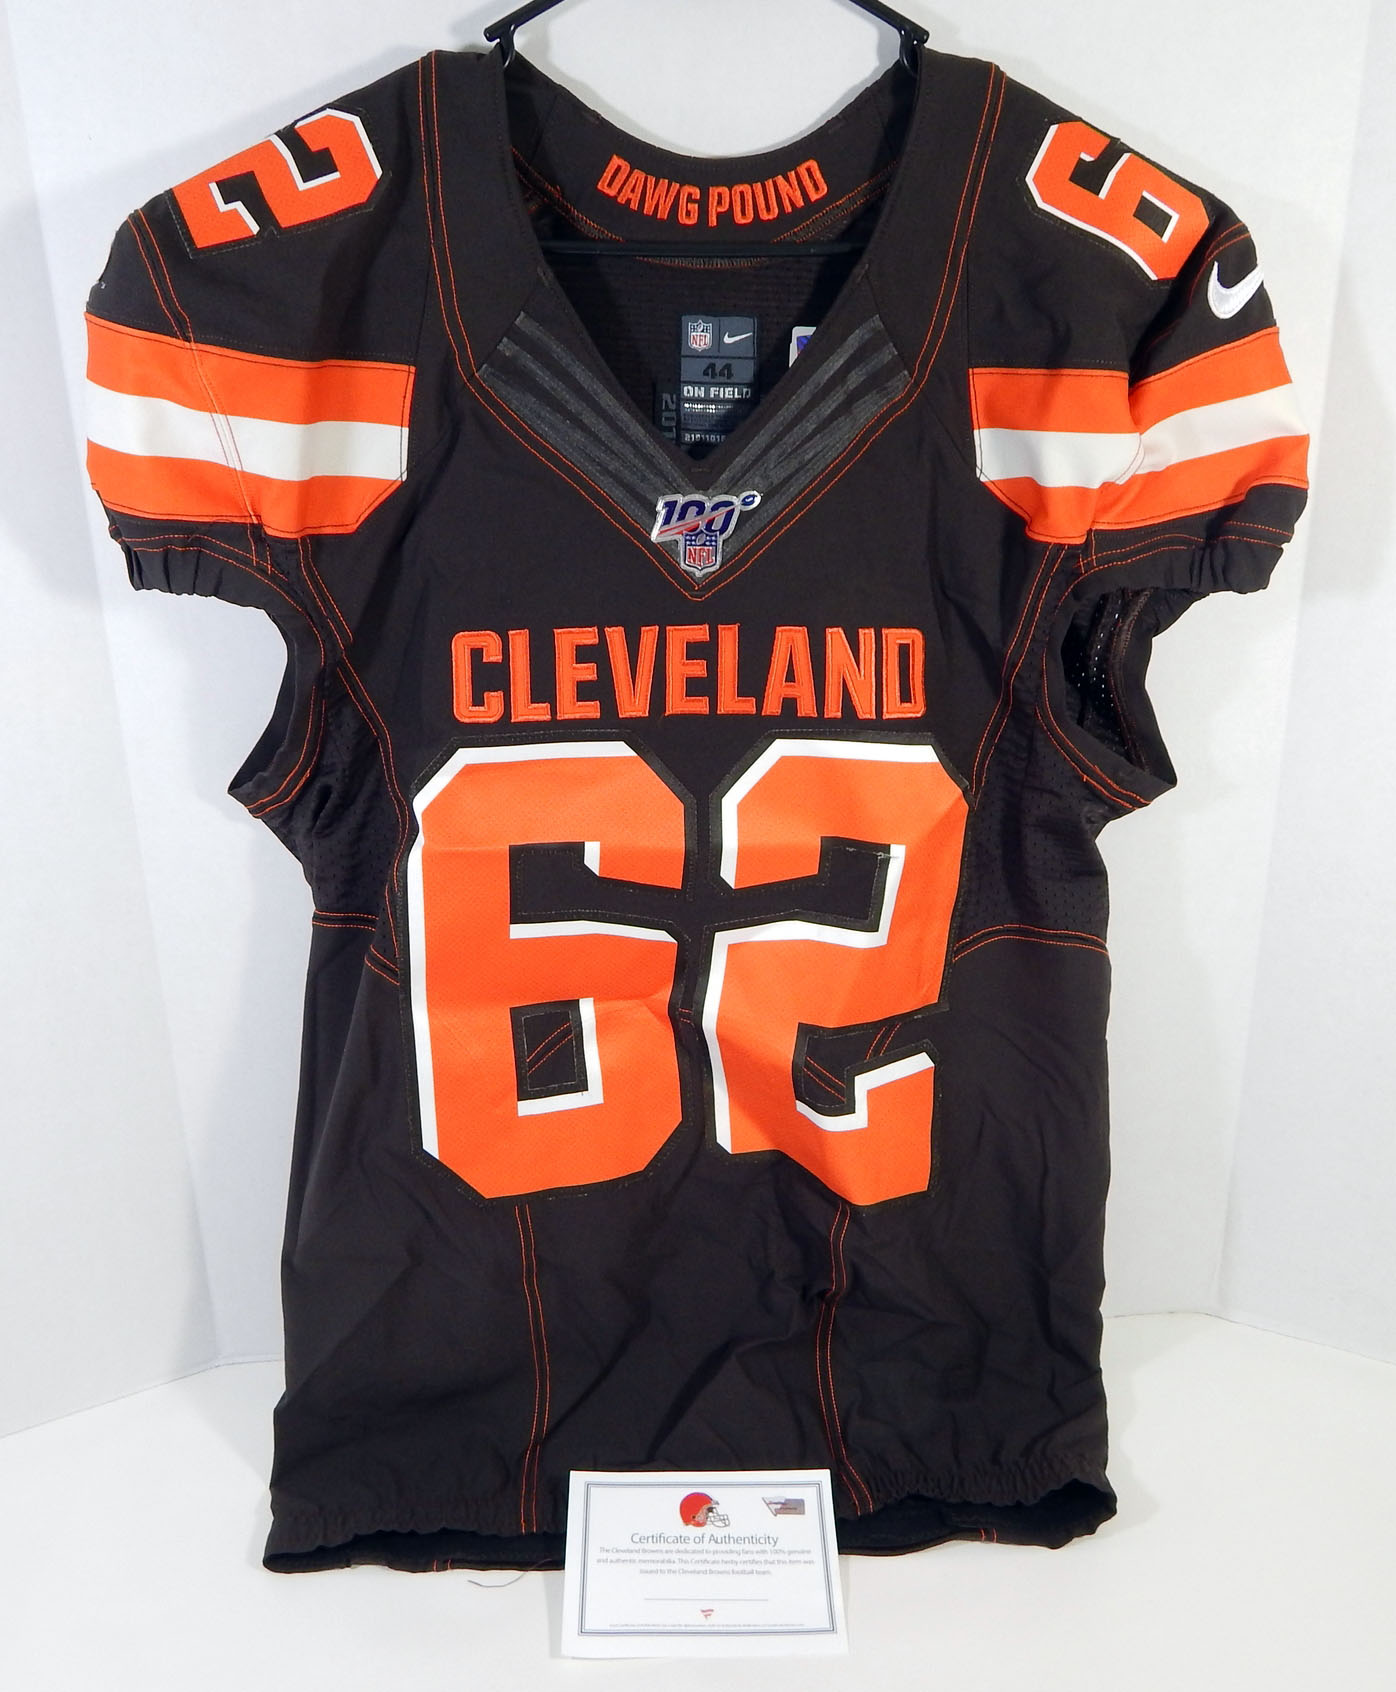 2019 Cleveland Browns Jarrell Owens #62 Brown Used Cheap super special price Jersey Game 1 Sale item